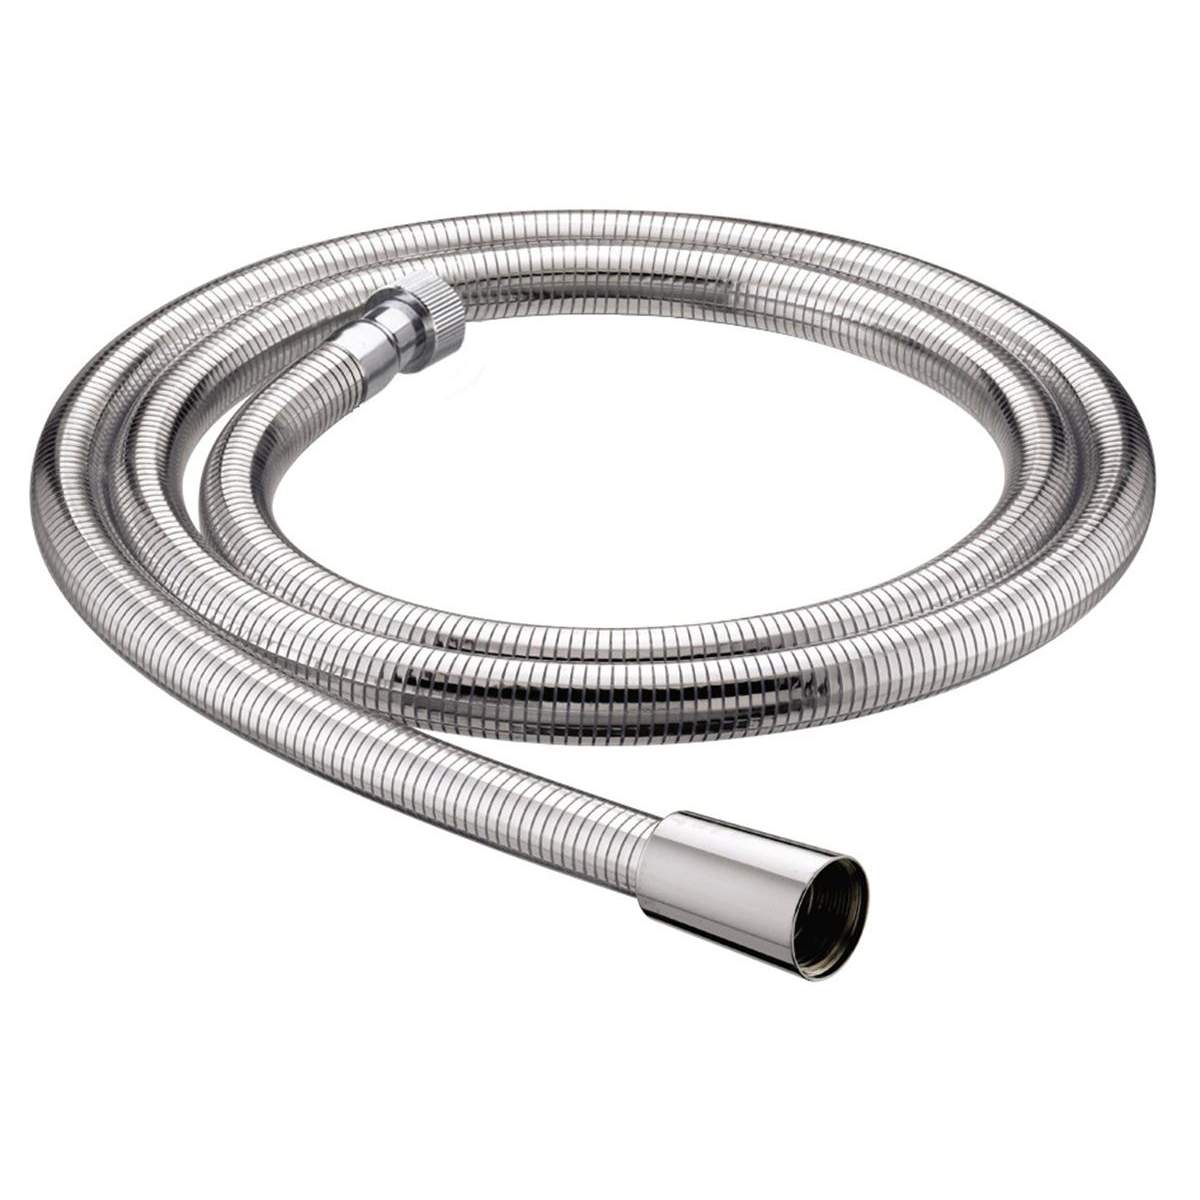 Bristan 1.75m Cone to Nut Easy Clean Shower Hose with 8mm Bore (HOS 175CNE01 C)